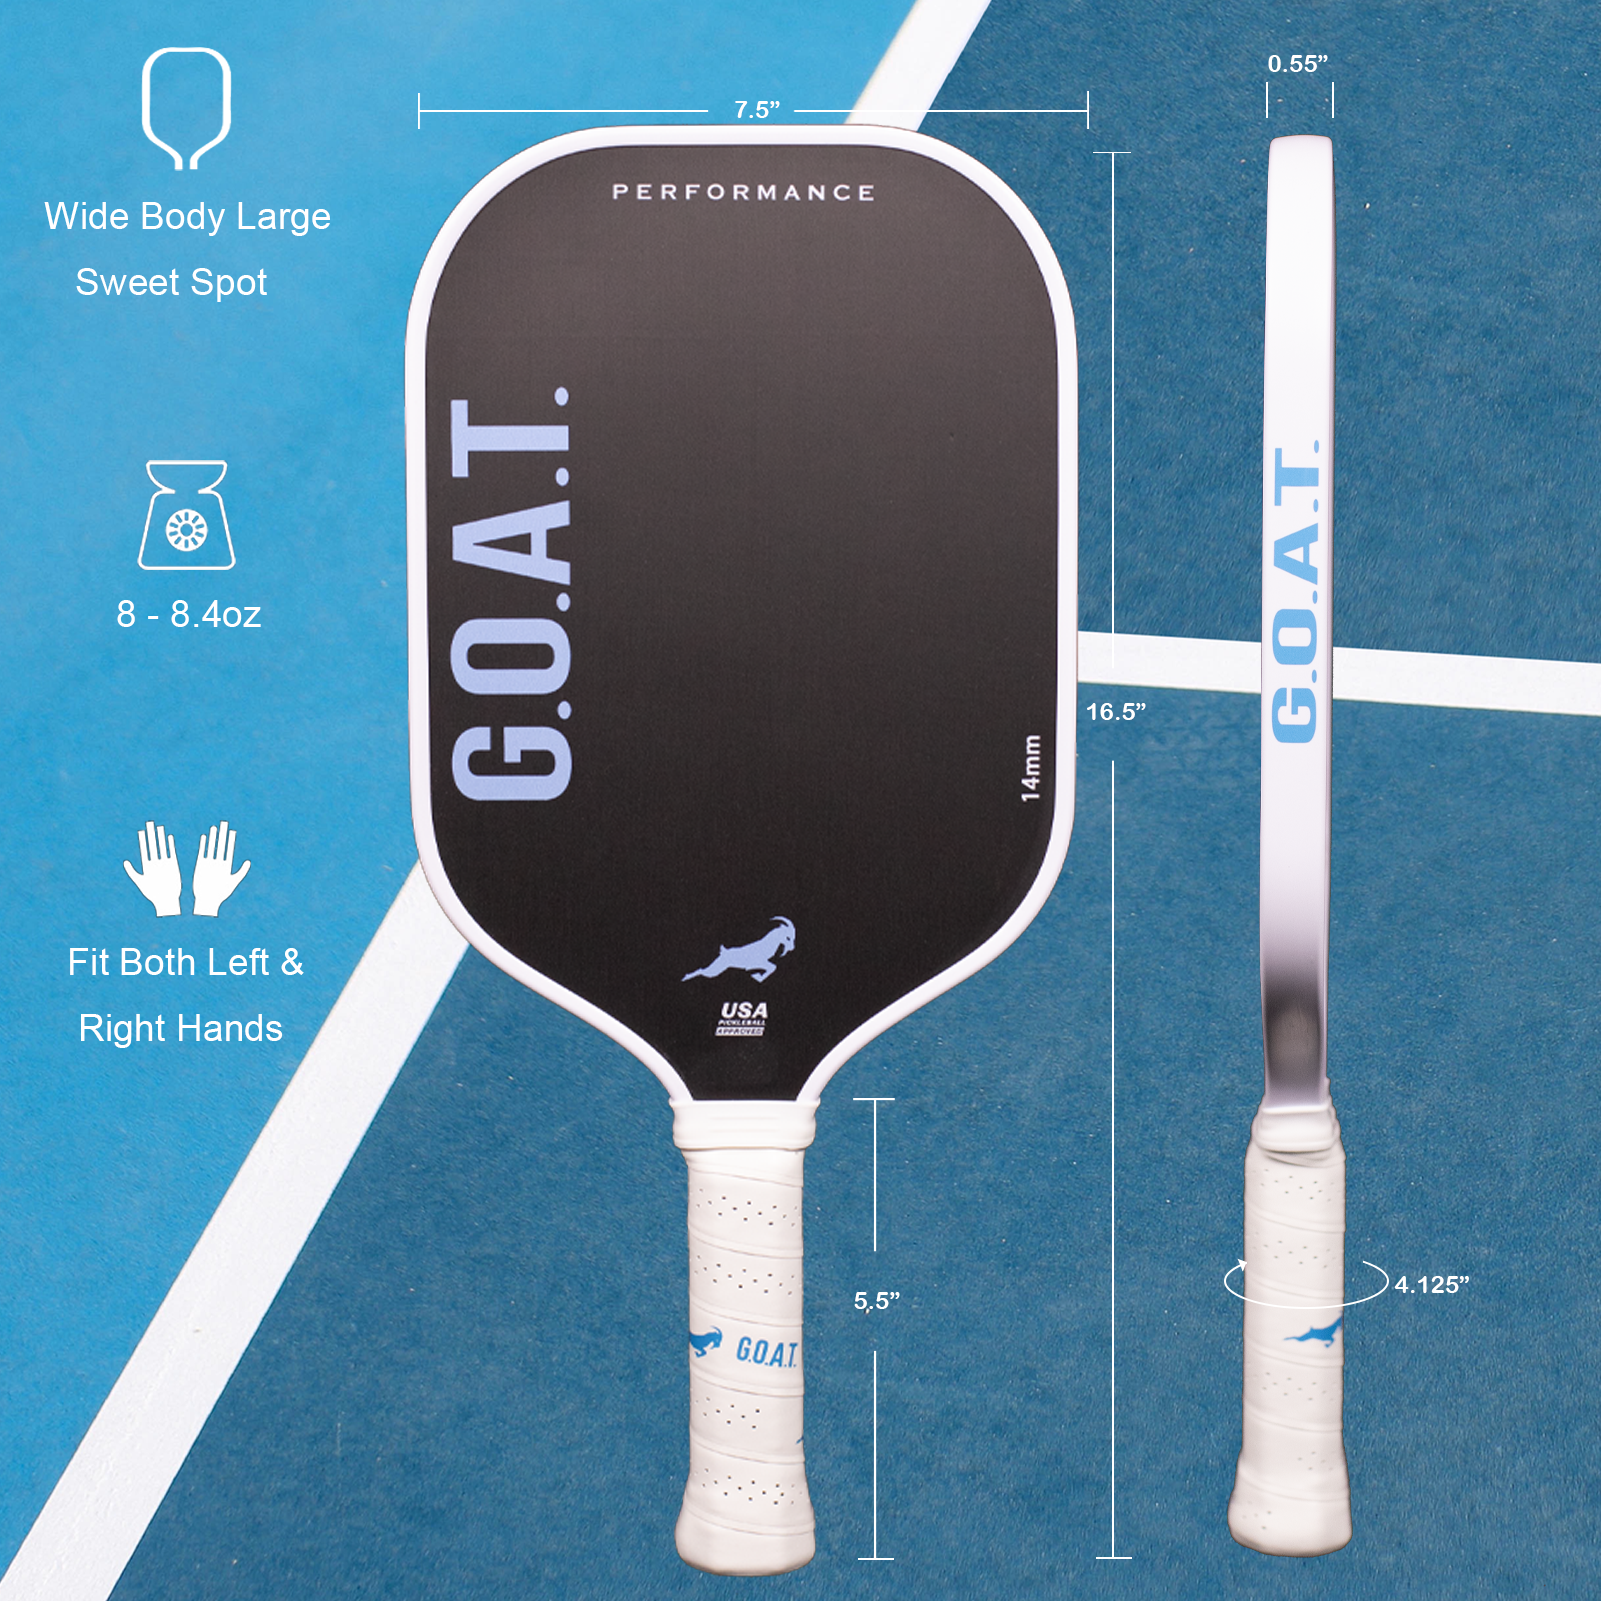 GOAT best performance paddle: white handle, black face with goat head, gray back. Highlights large sweet spot, for powerful play. Fits both left and right hands..